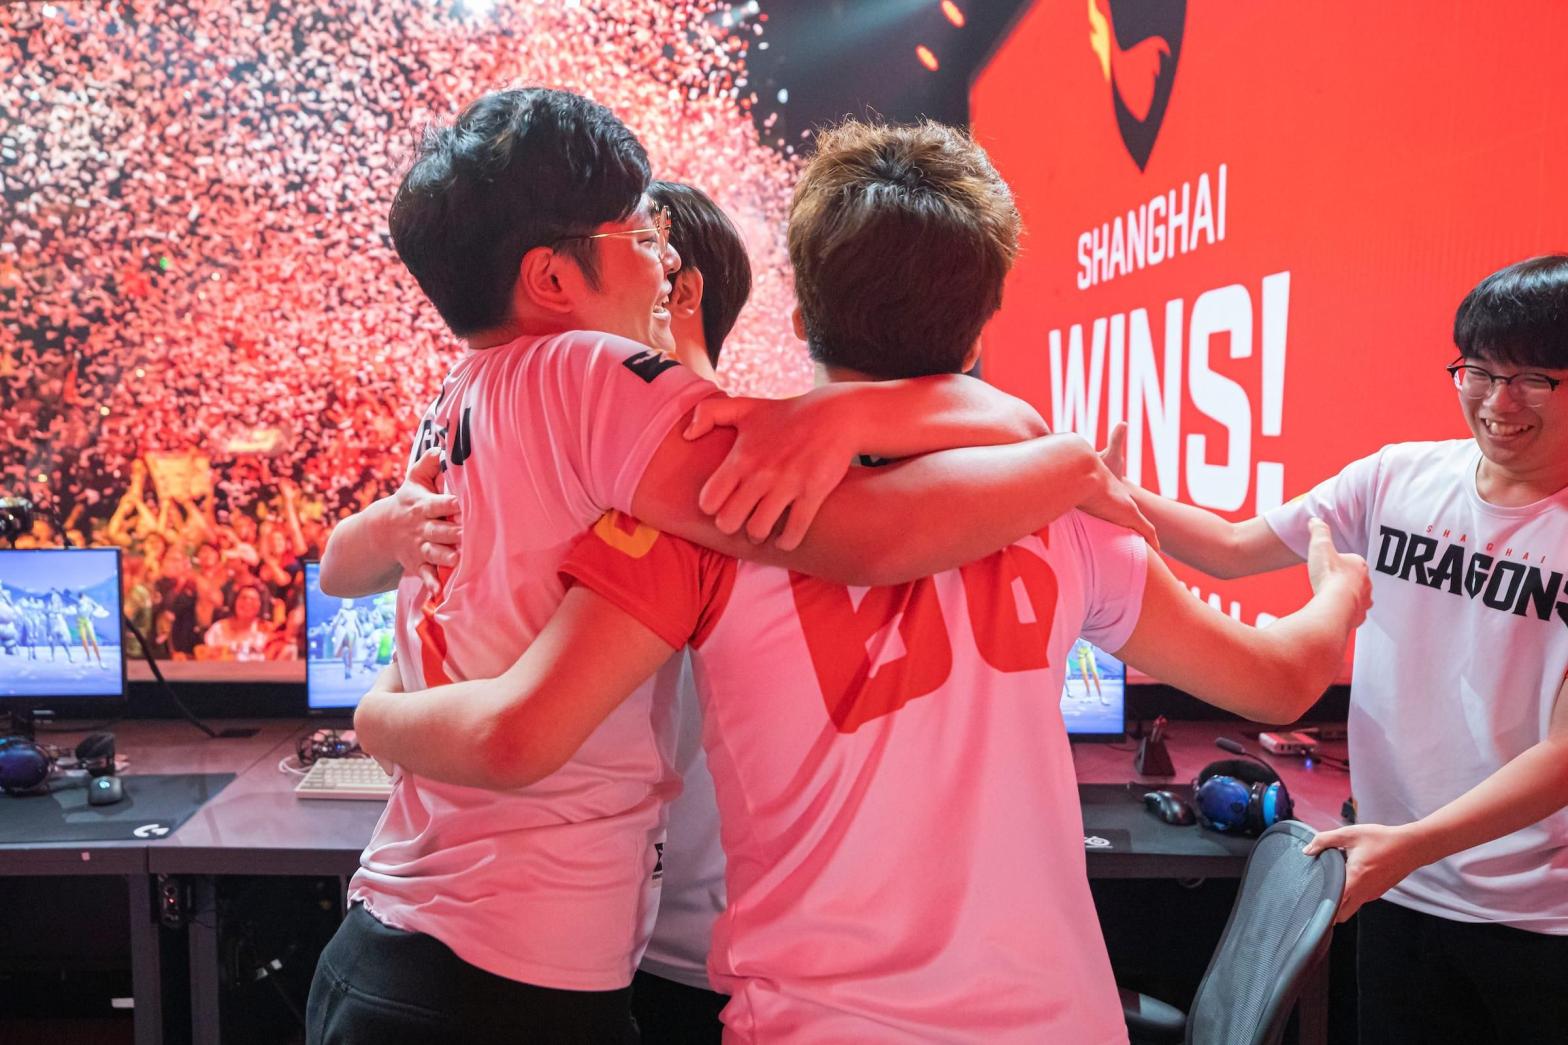 This moment changed everything for the Dragons. They have been on an upward trajectory since. (Photo: Robert Paul / Blizzard)